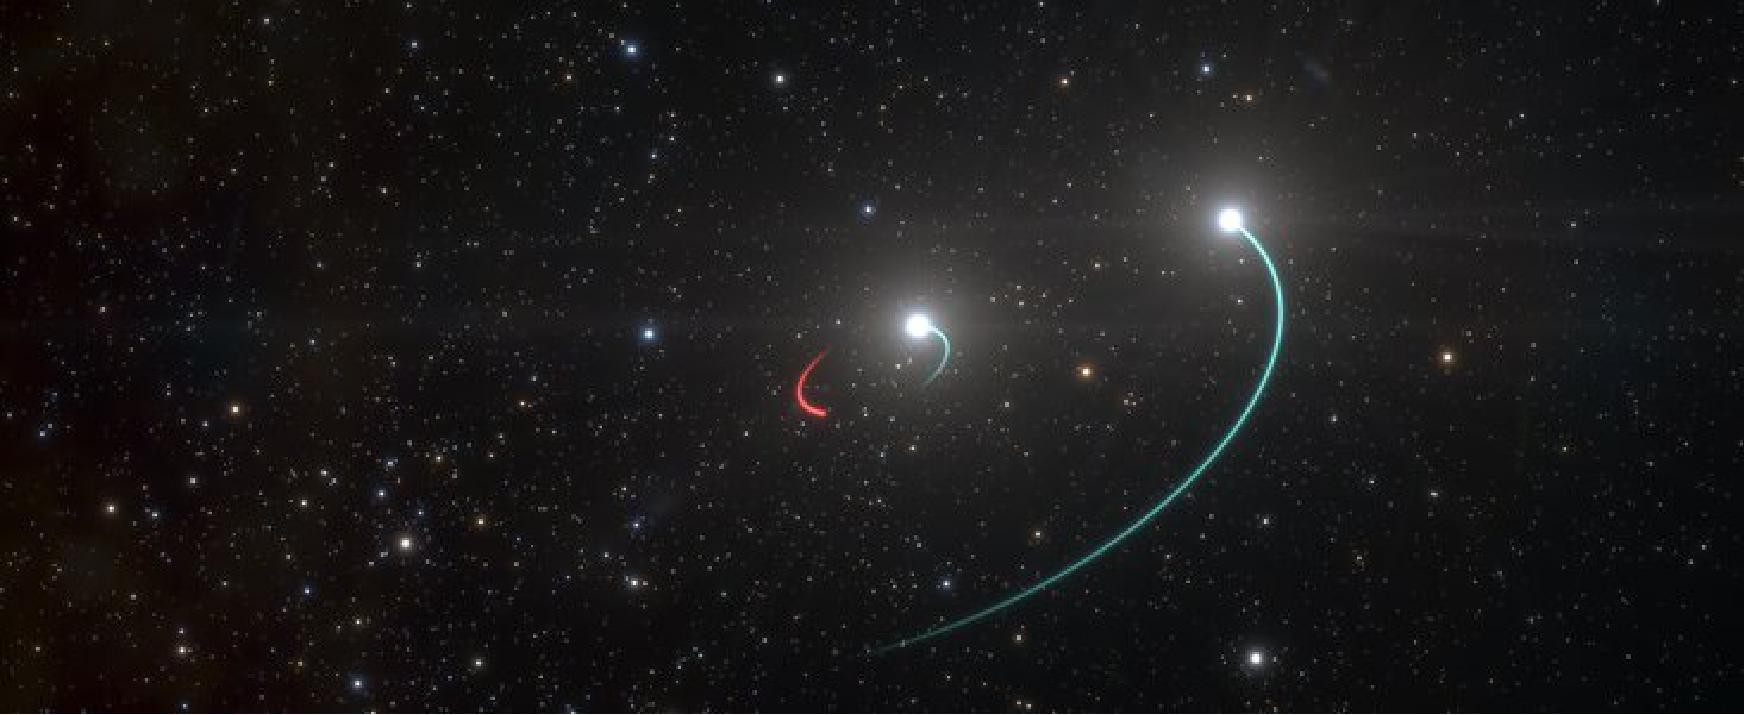 Figure 53: This artist's impression shows the orbits of the objects in the HR 6819 triple system (a Milky Way star). This system is made up of an inner binary with one star (orbit in blue) and a newly discovered black hole (orbit in red), as well as a third object, another star, in a wider orbit (also in blue). The team originally believed there were only two objects, the two stars, in the system. However, as they analyzed their observations, they were stunned when they revealed a third, previously undiscovered body in HR 6819: a black hole, the closest ever found to Earth. The black hole is invisible, but it makes its presence known by its gravitational pull, which forces the luminous inner star into an orbit. The objects in this inner pair have roughly the same mass and circular orbits. The observations, with the FEROS spectrograph on the 2.2 m telescope at ESO's La Silla, showed that the inner visible star orbits the black hole every 40 days, while the second star is at a large distance from this inner pair (image credit: ESO/L. Calçada)